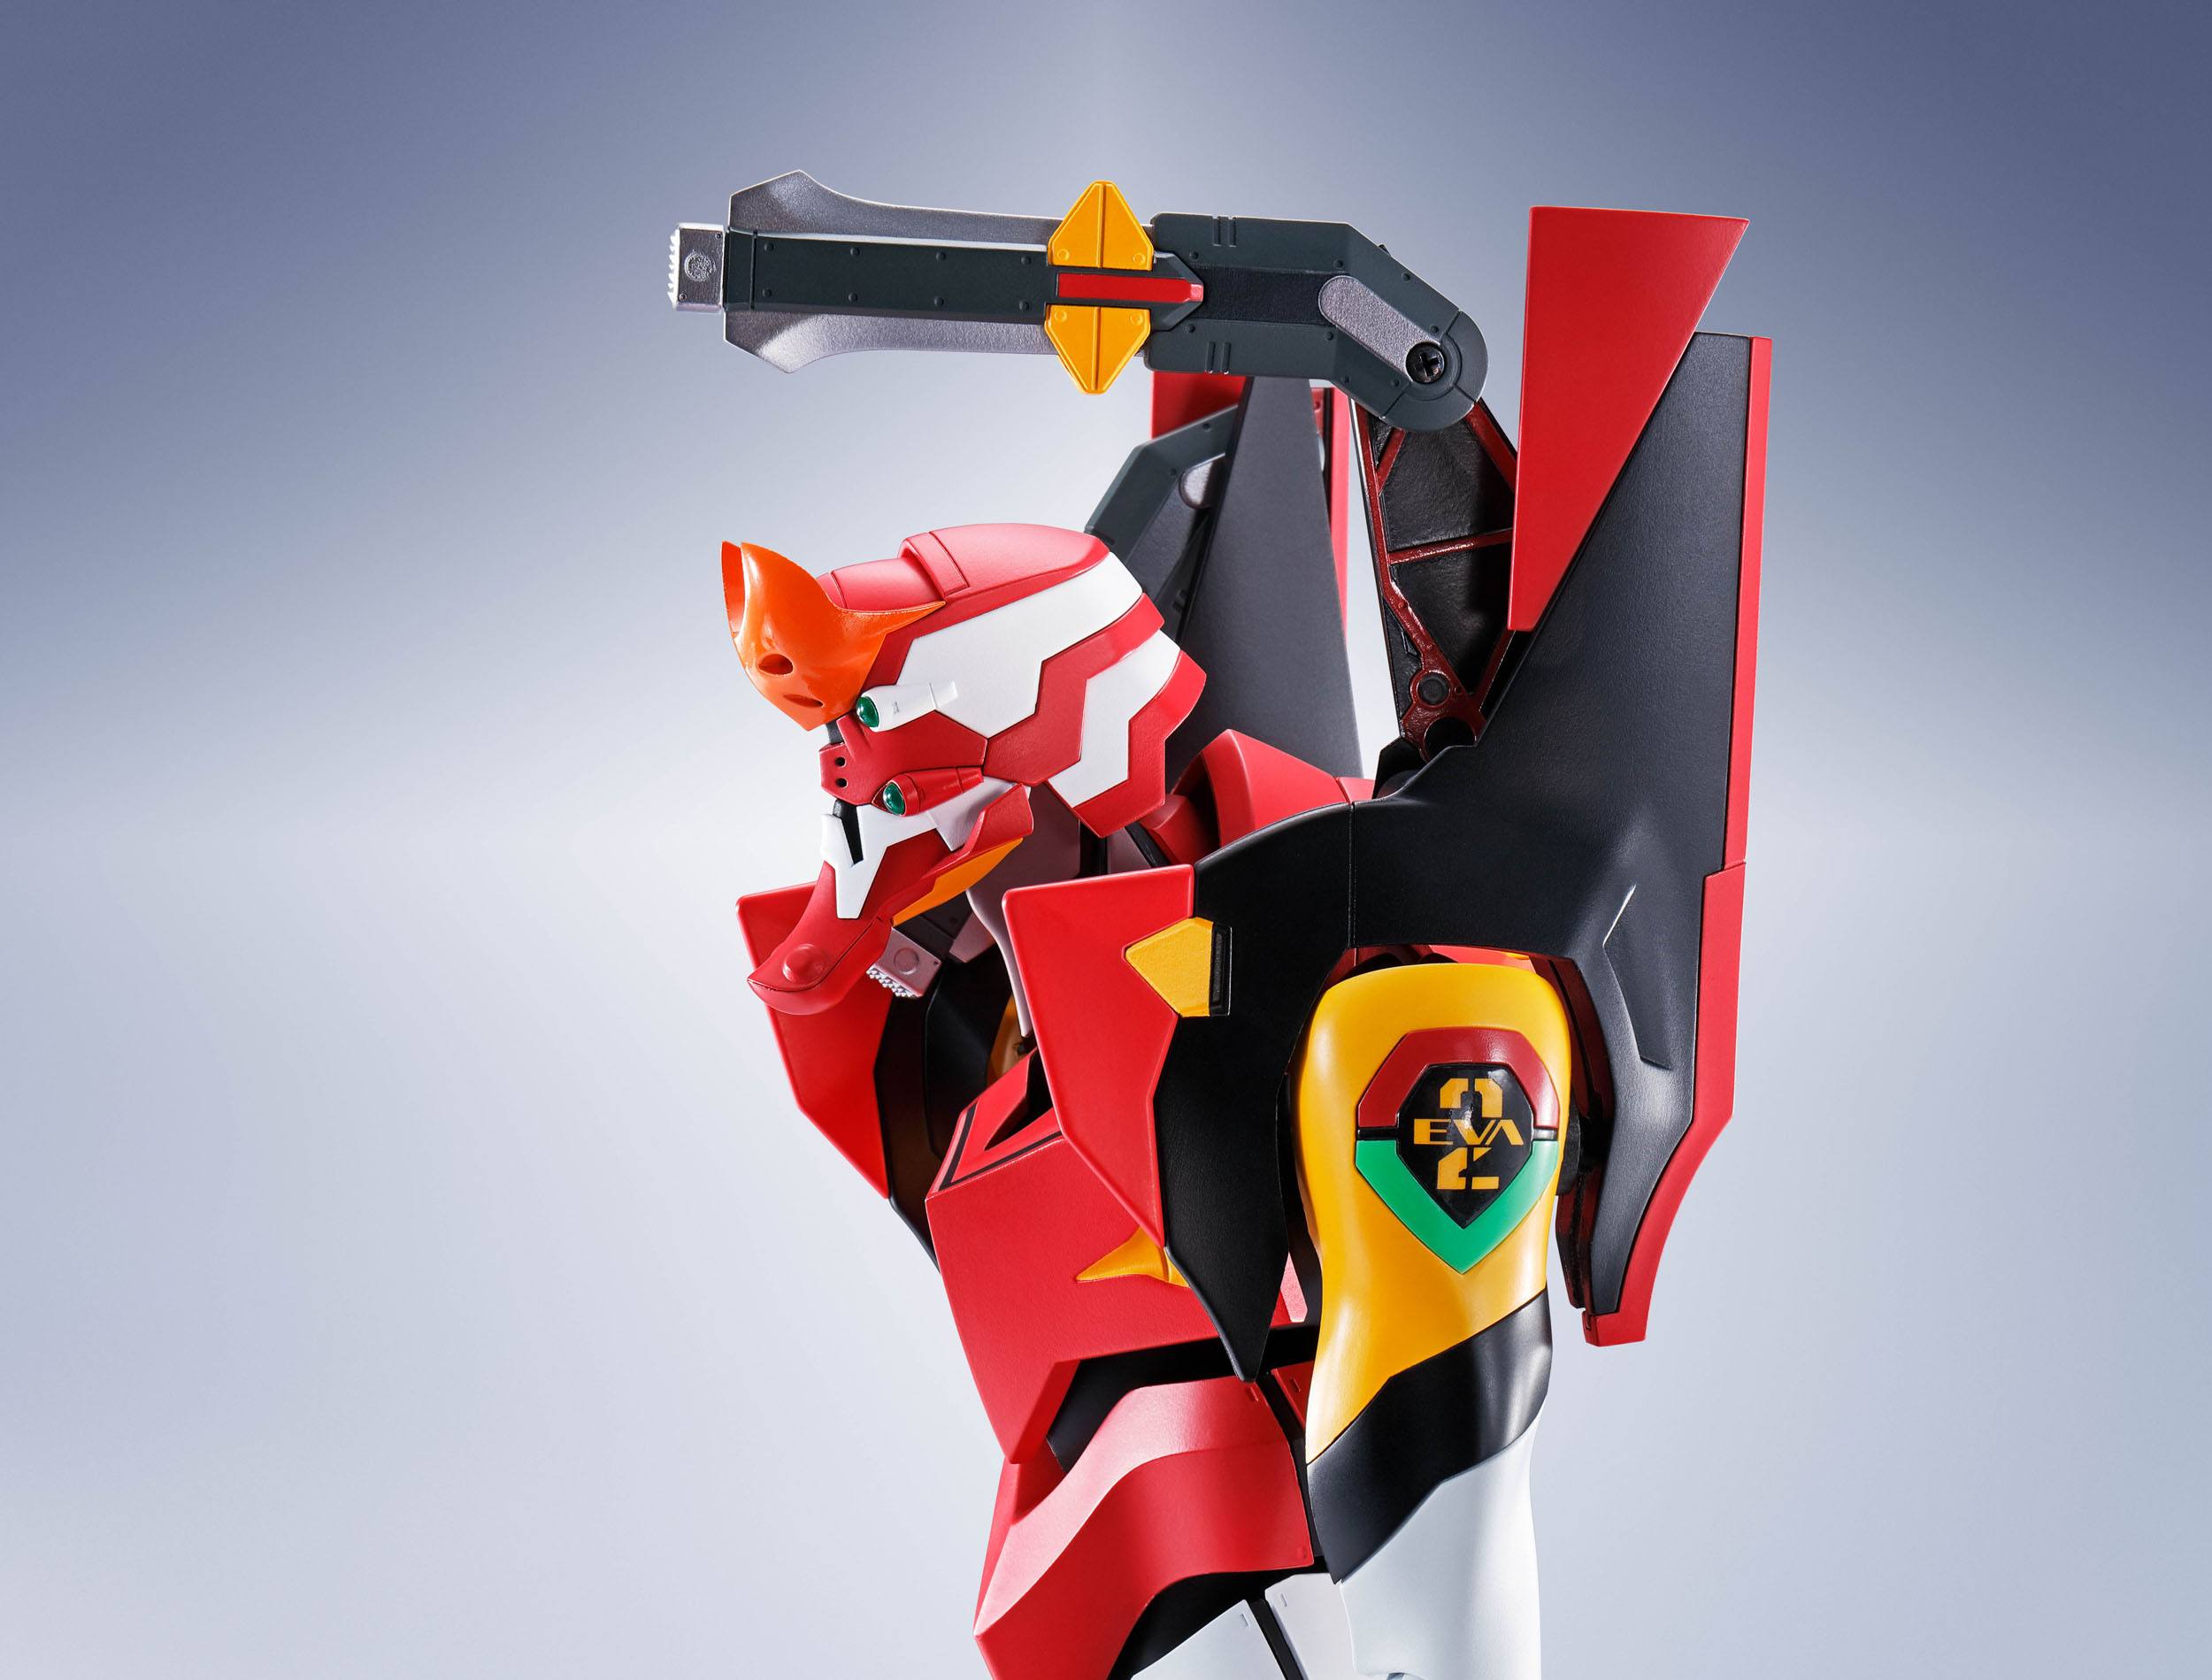 Evangelion: 2.0 You Can (Not) Advance DYNACTION Action Figure Evangelion-02 40 cm